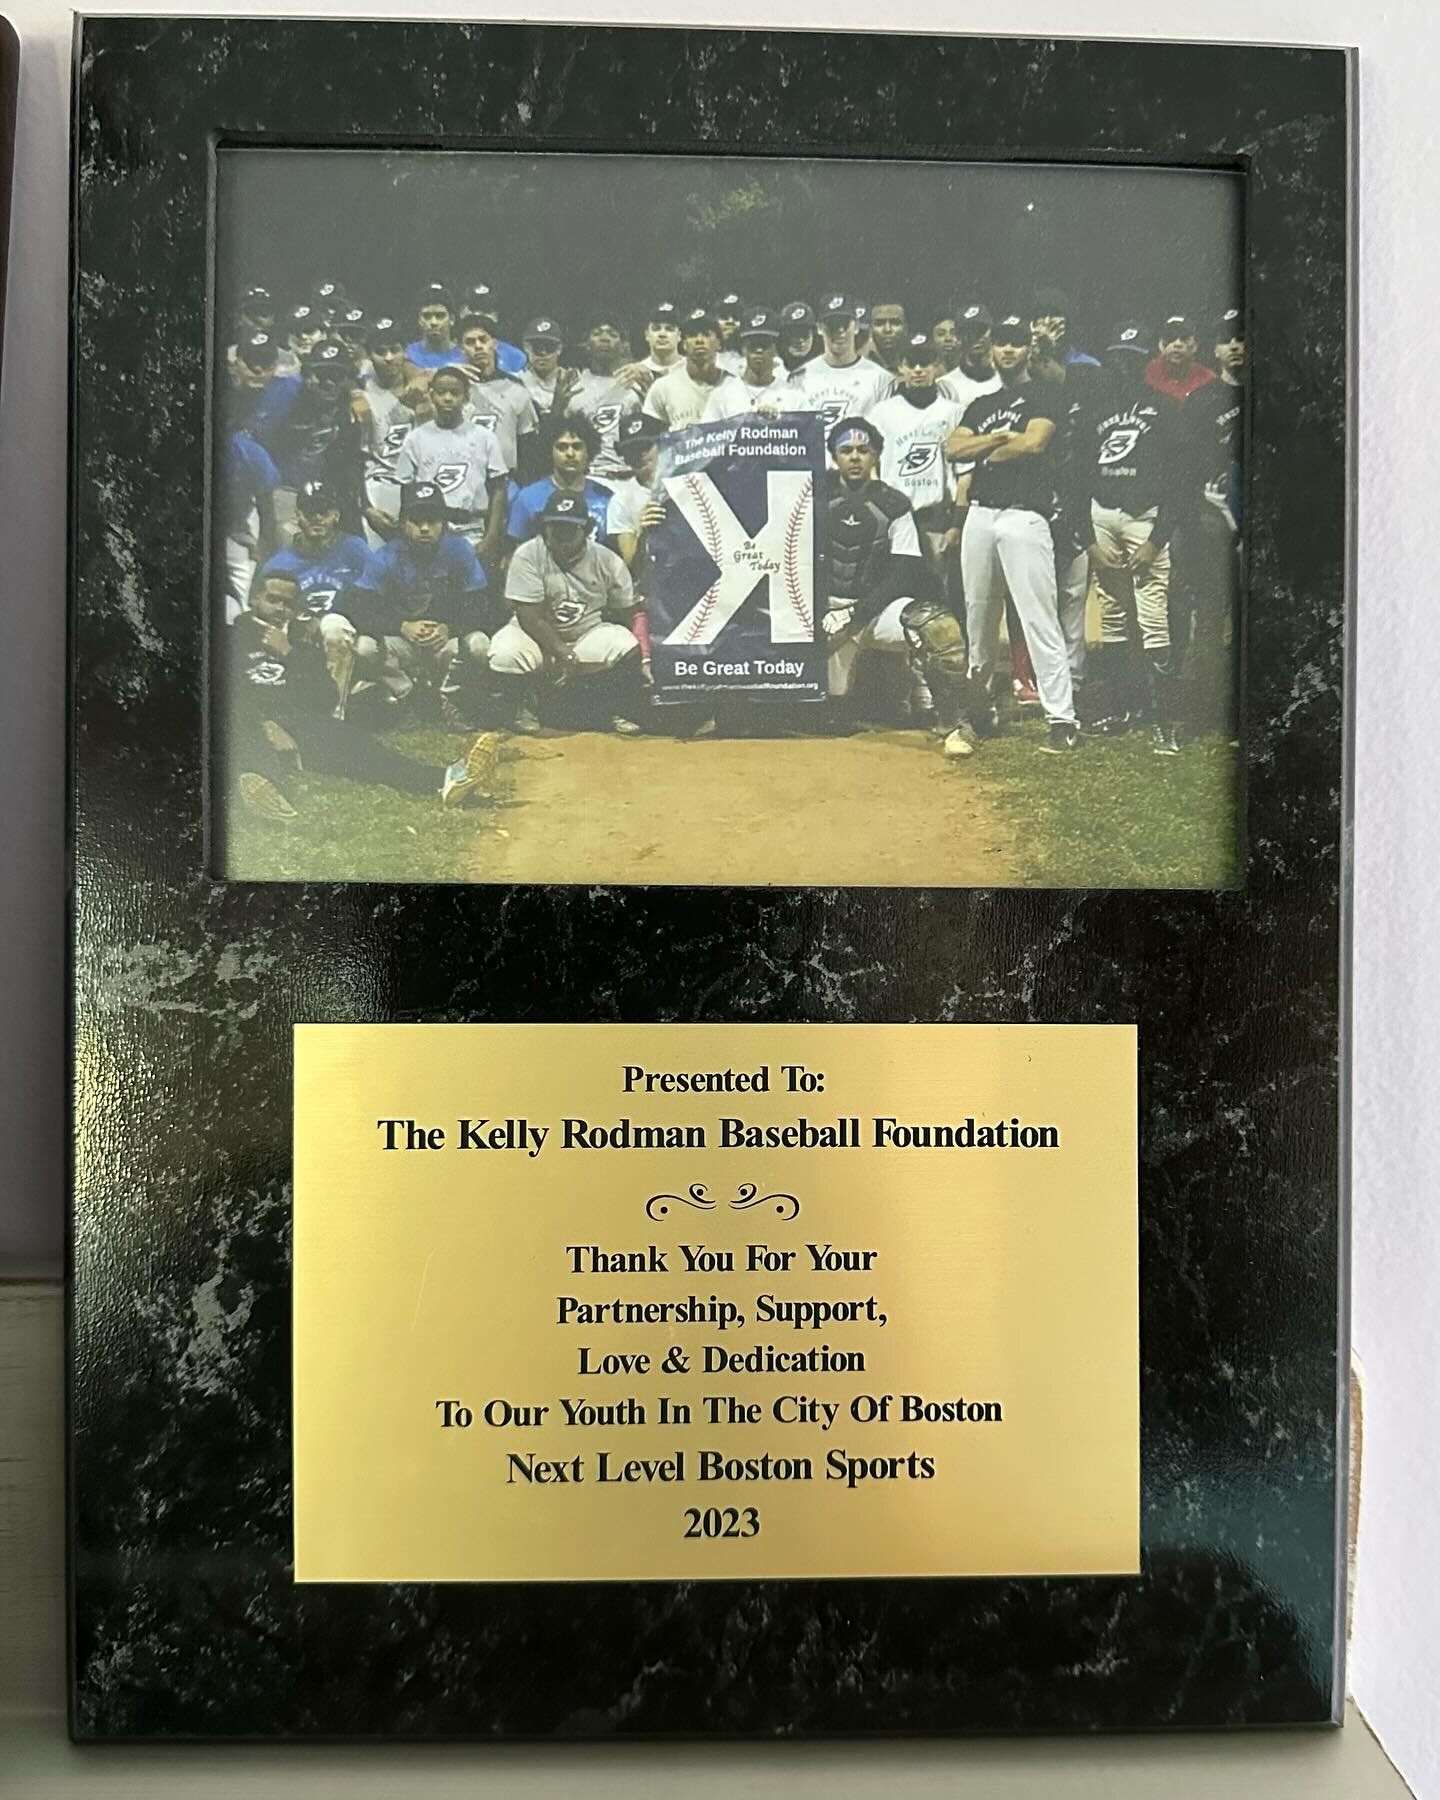 Thank you to @nextlevel_boston for the commemorative plaque that we received yesterday. The partnership with this incredible youth program is one that we will continue to sponsor with the greatest honor. A very special thank you to Christian Ortiz an